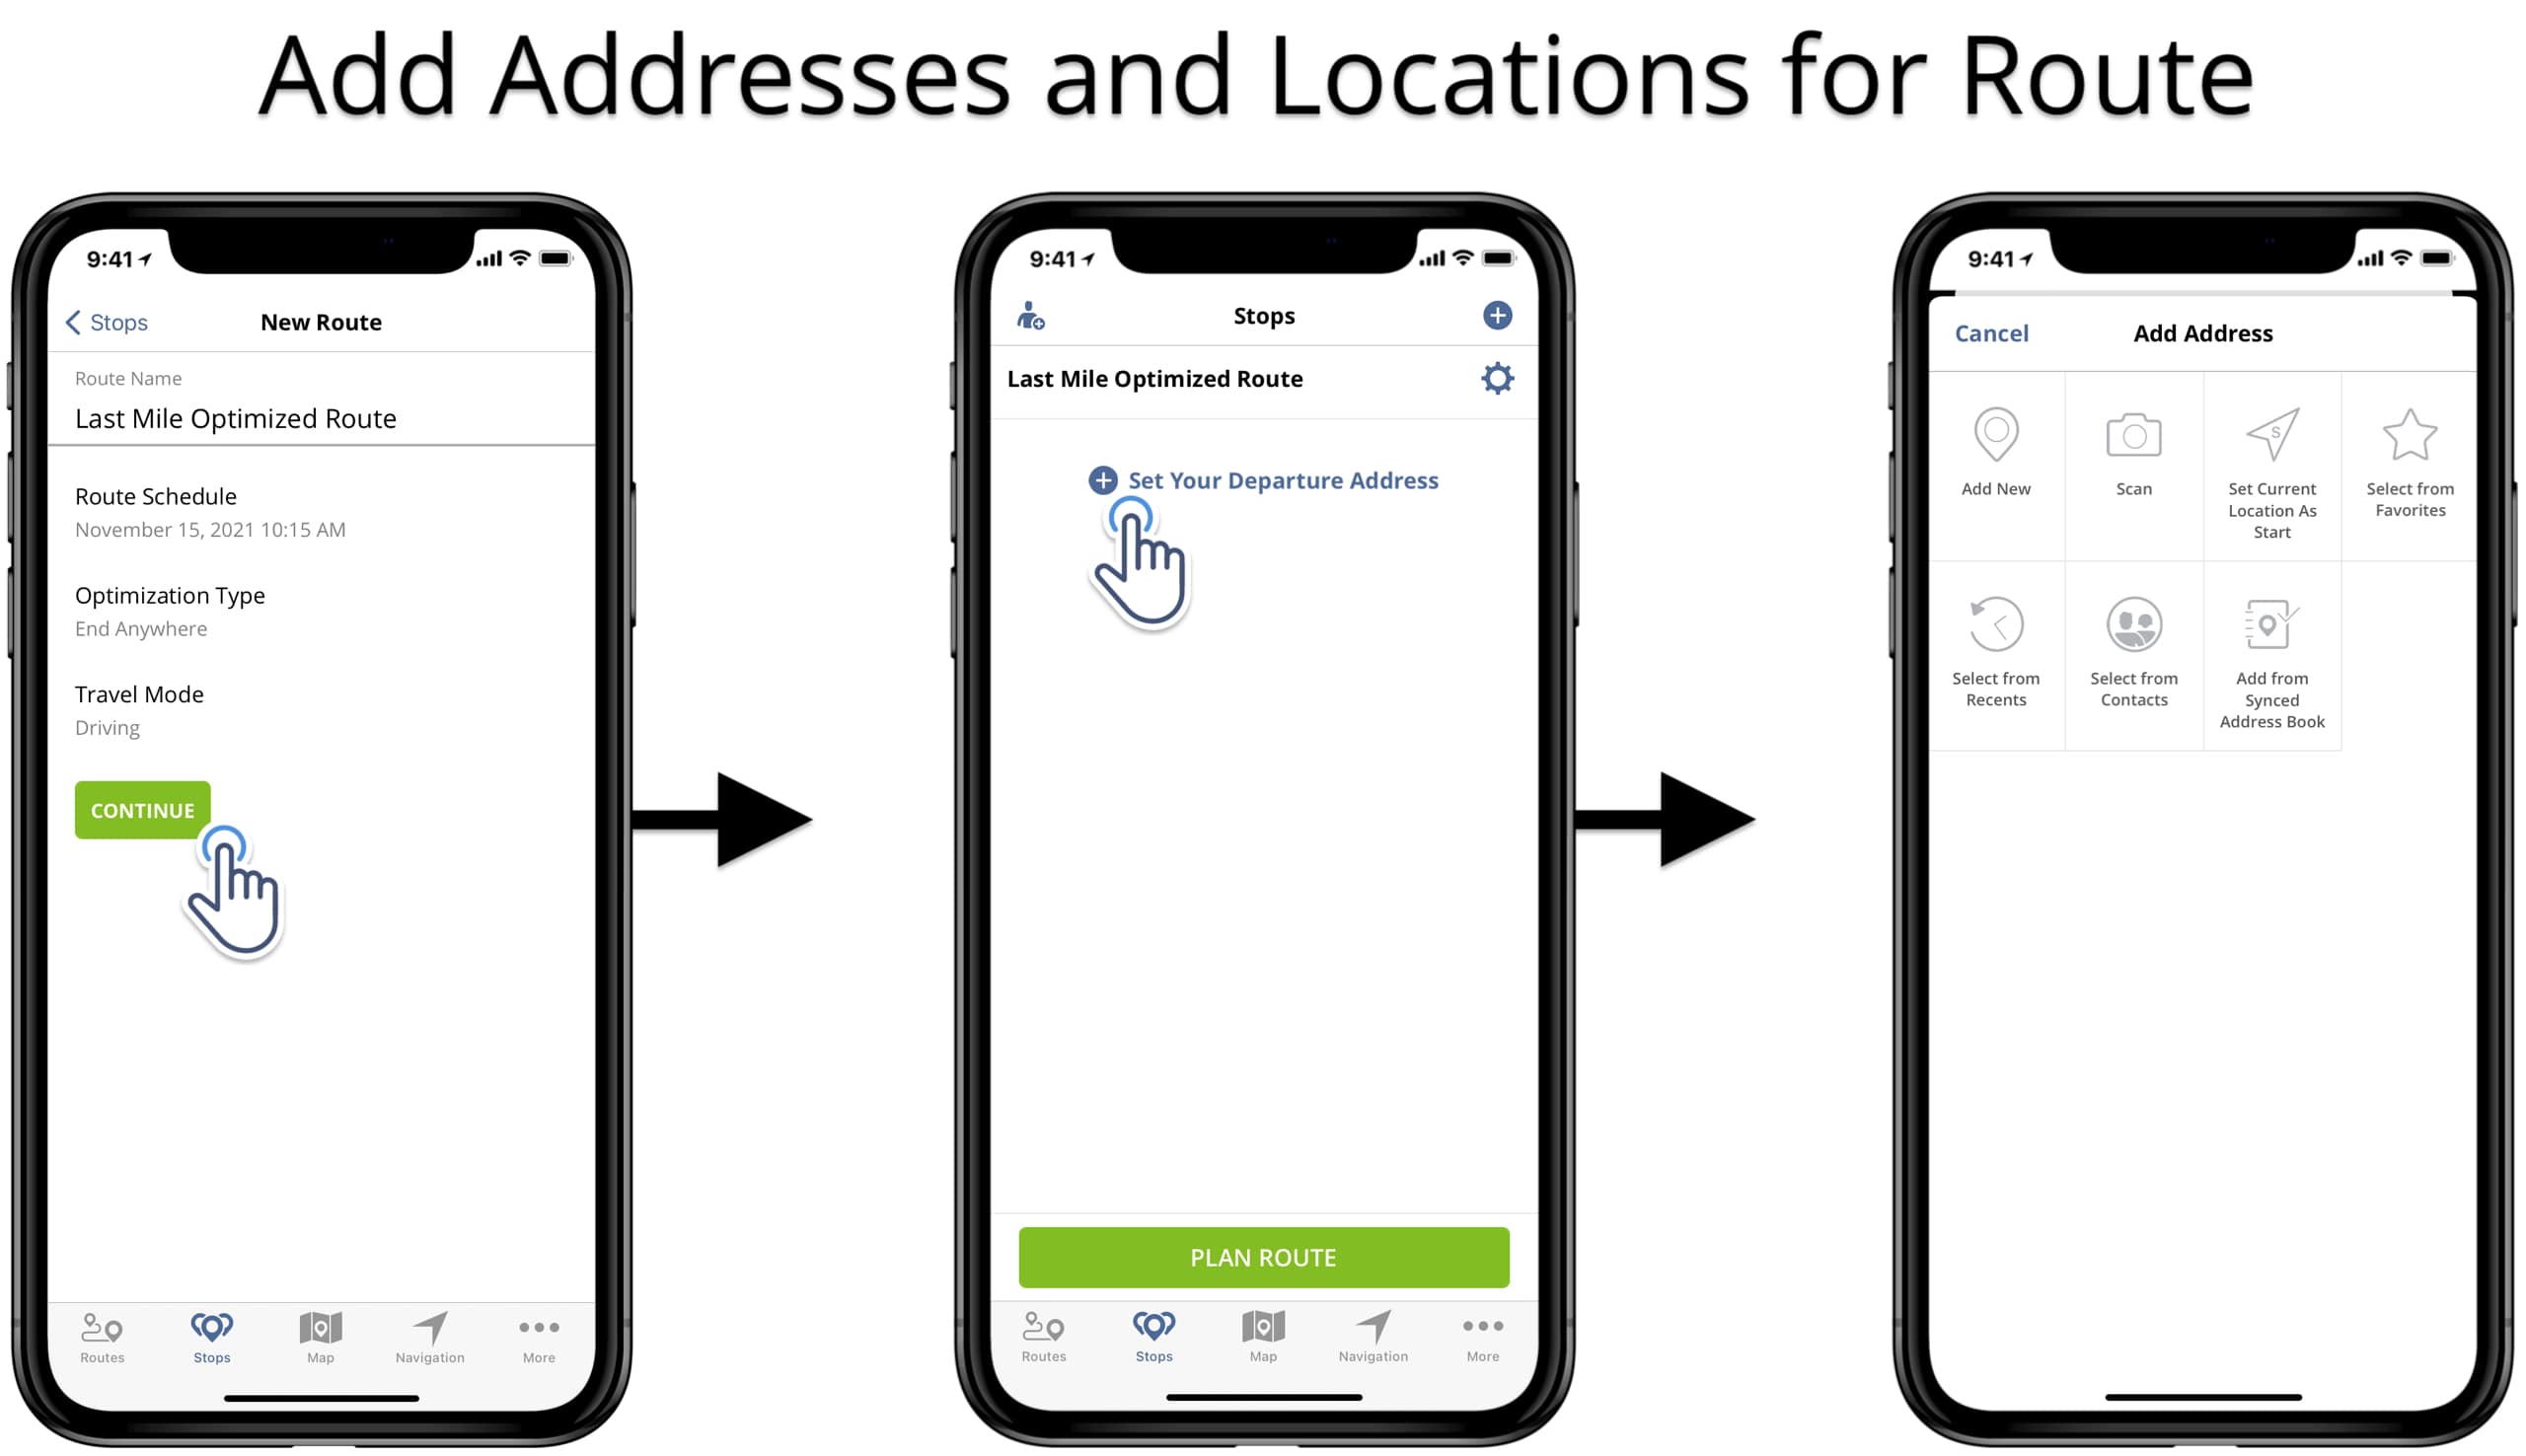 Add addresses for planning routes on Route4Me's routing app for iPhone and iPad.